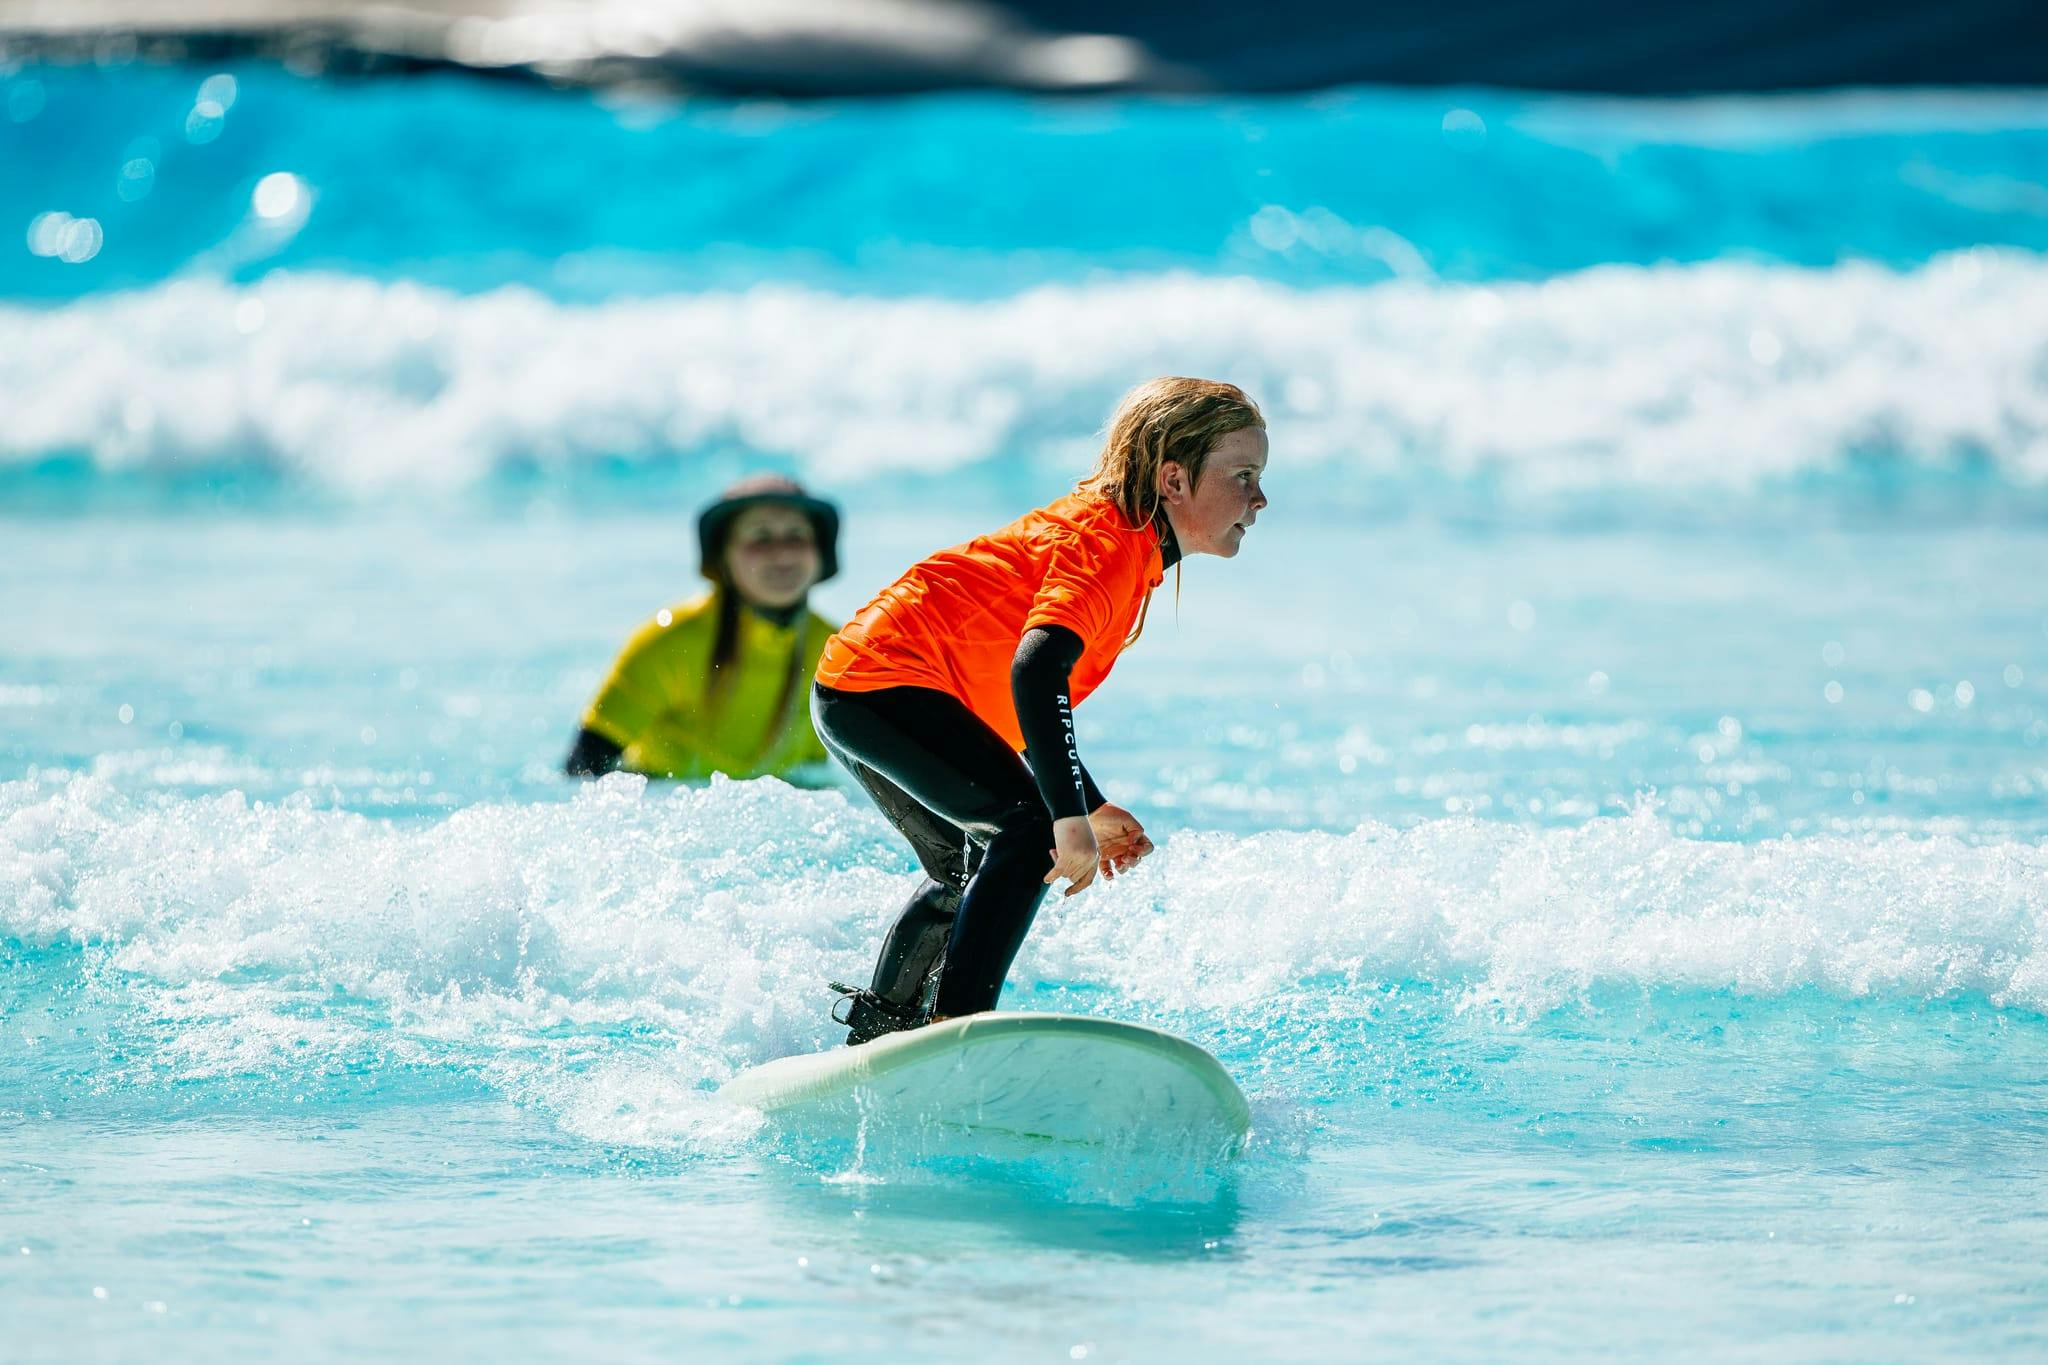 A photograph of a young person learning to surf at the URBNSURF Sydney wave pool. 